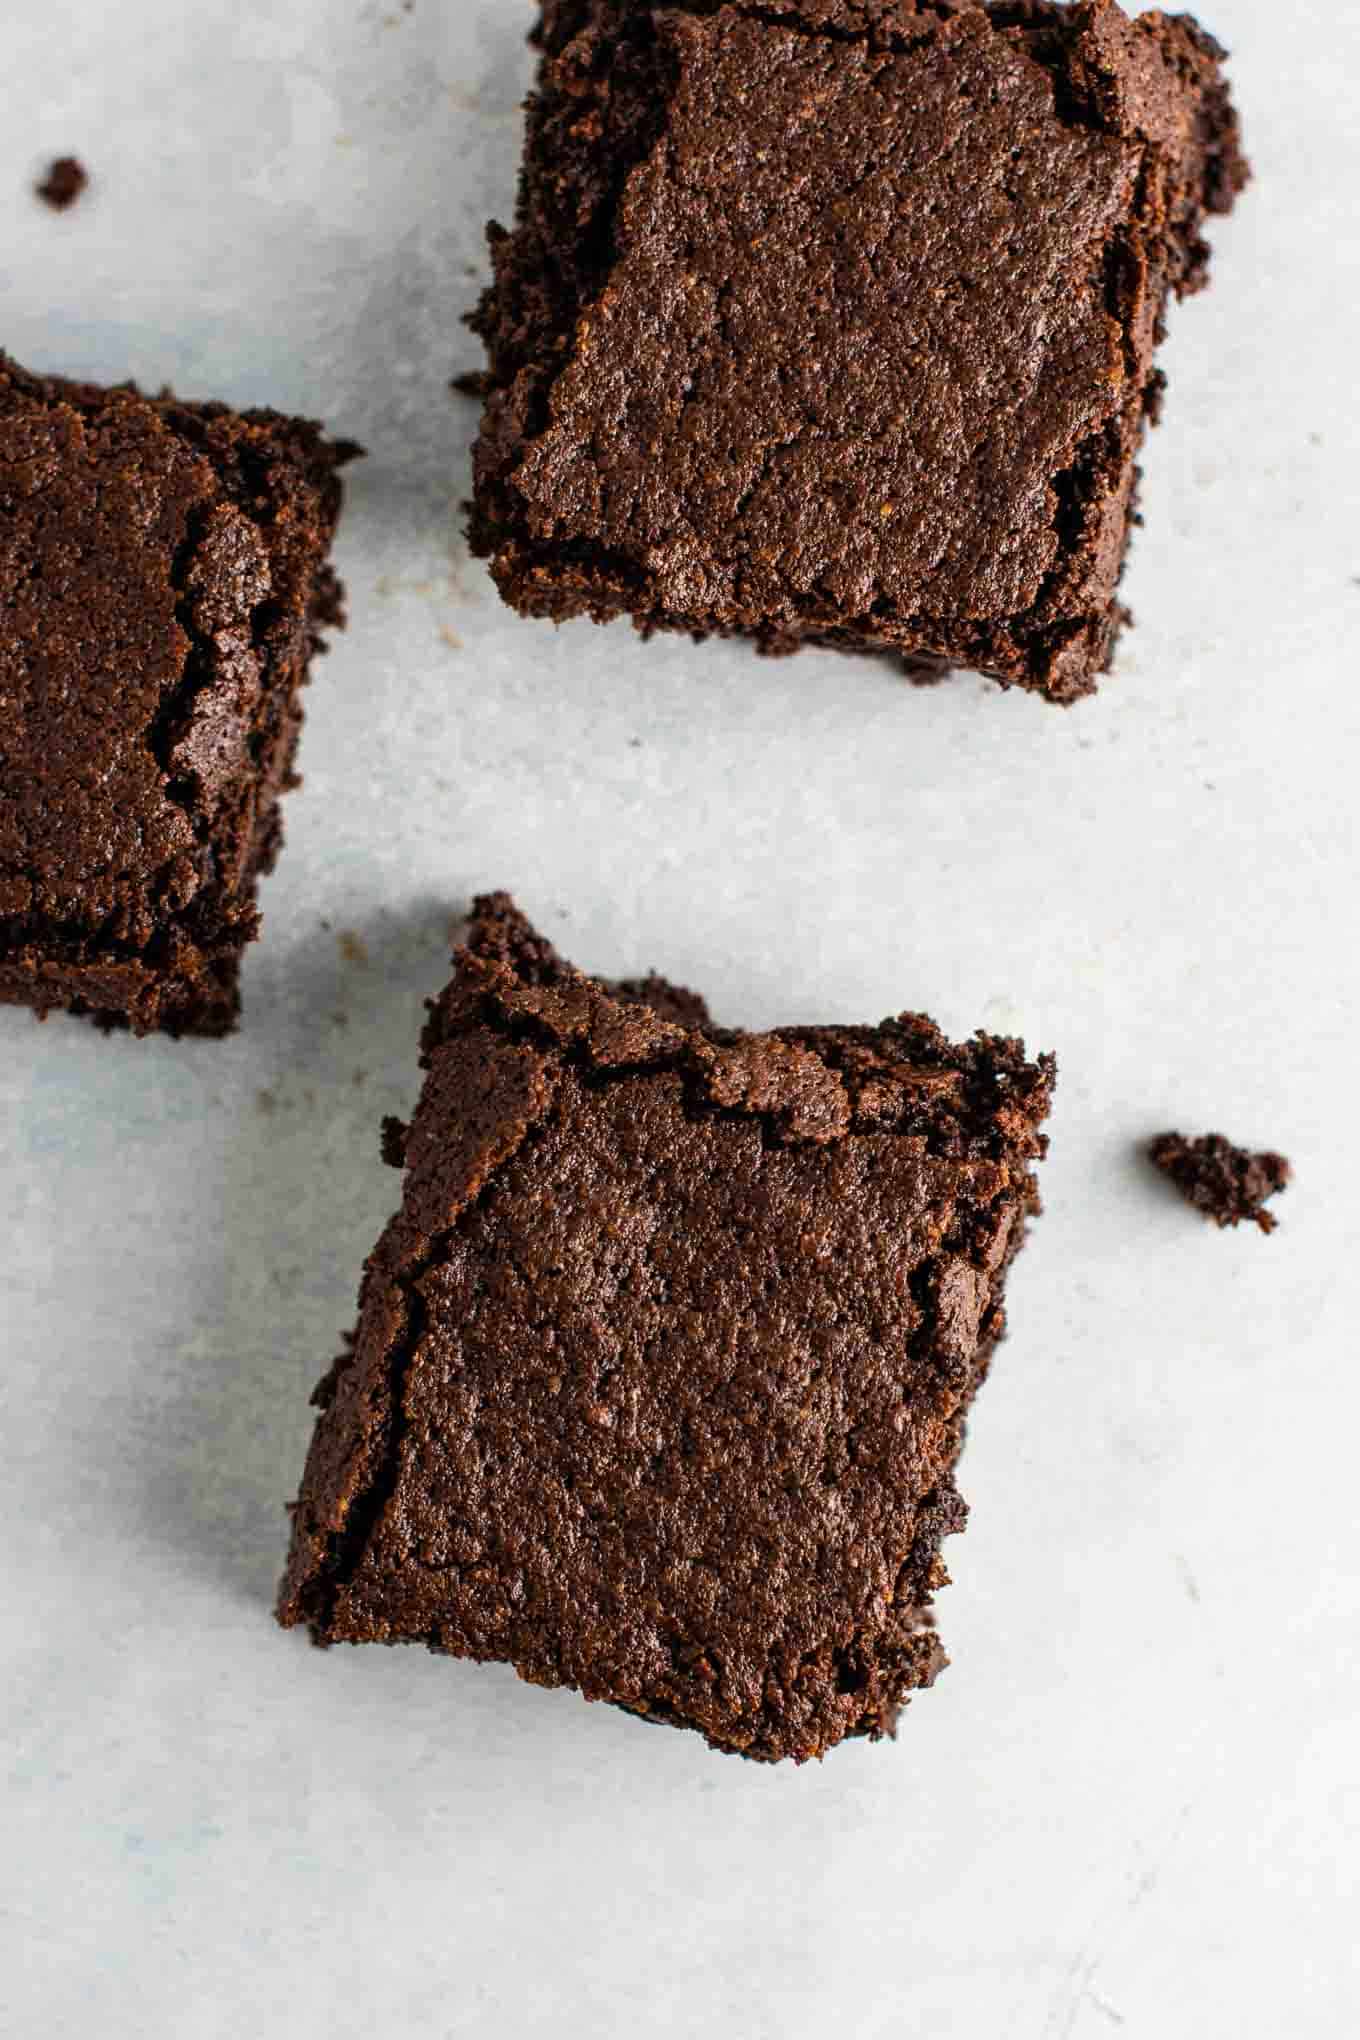 Easy gluten free brownie recipe made with oat flour and coconut flour. Dairy free, fudgy, and taste amazing! #glutenfreebrownies #glutenfree #glutenfreedessert #dessert #brownies #oatflour #coconutflour